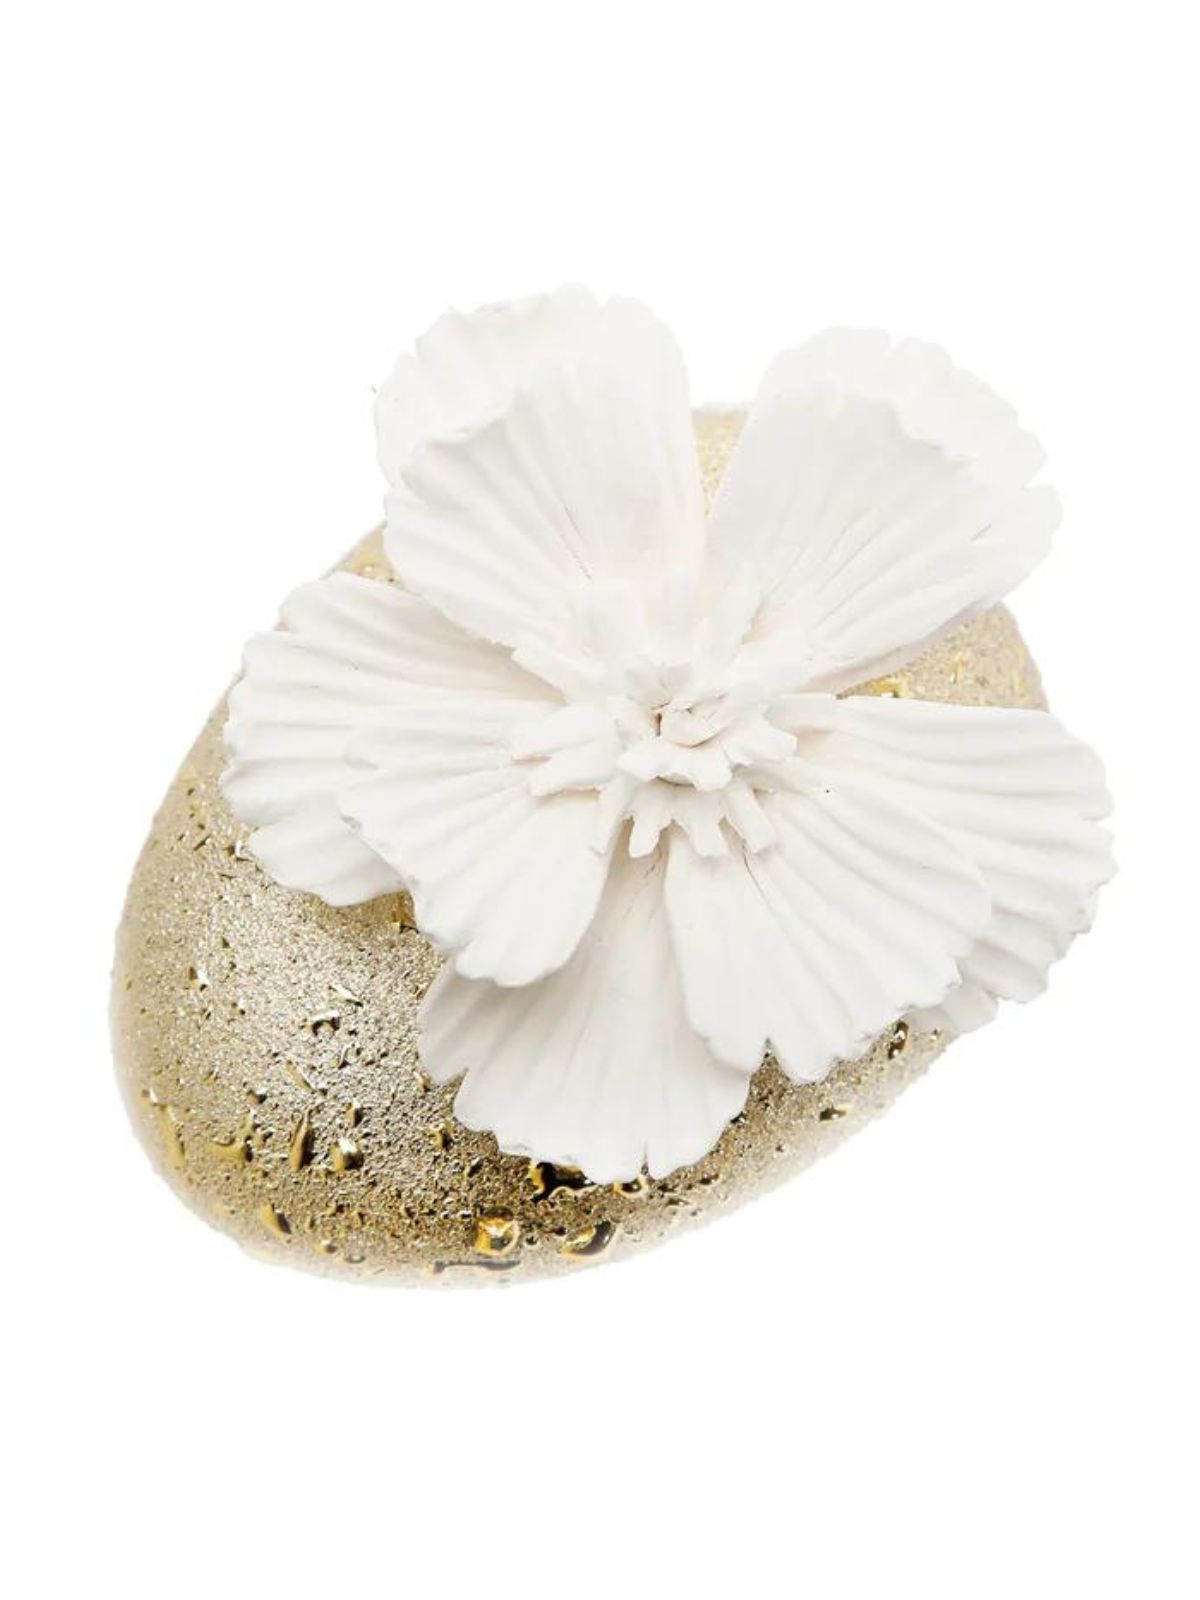 Champagne gold porcelain oil diffuser with white dimensional flower with a fresh floral fragrance of Iris and Rose scent sod by KYA Home Decor.